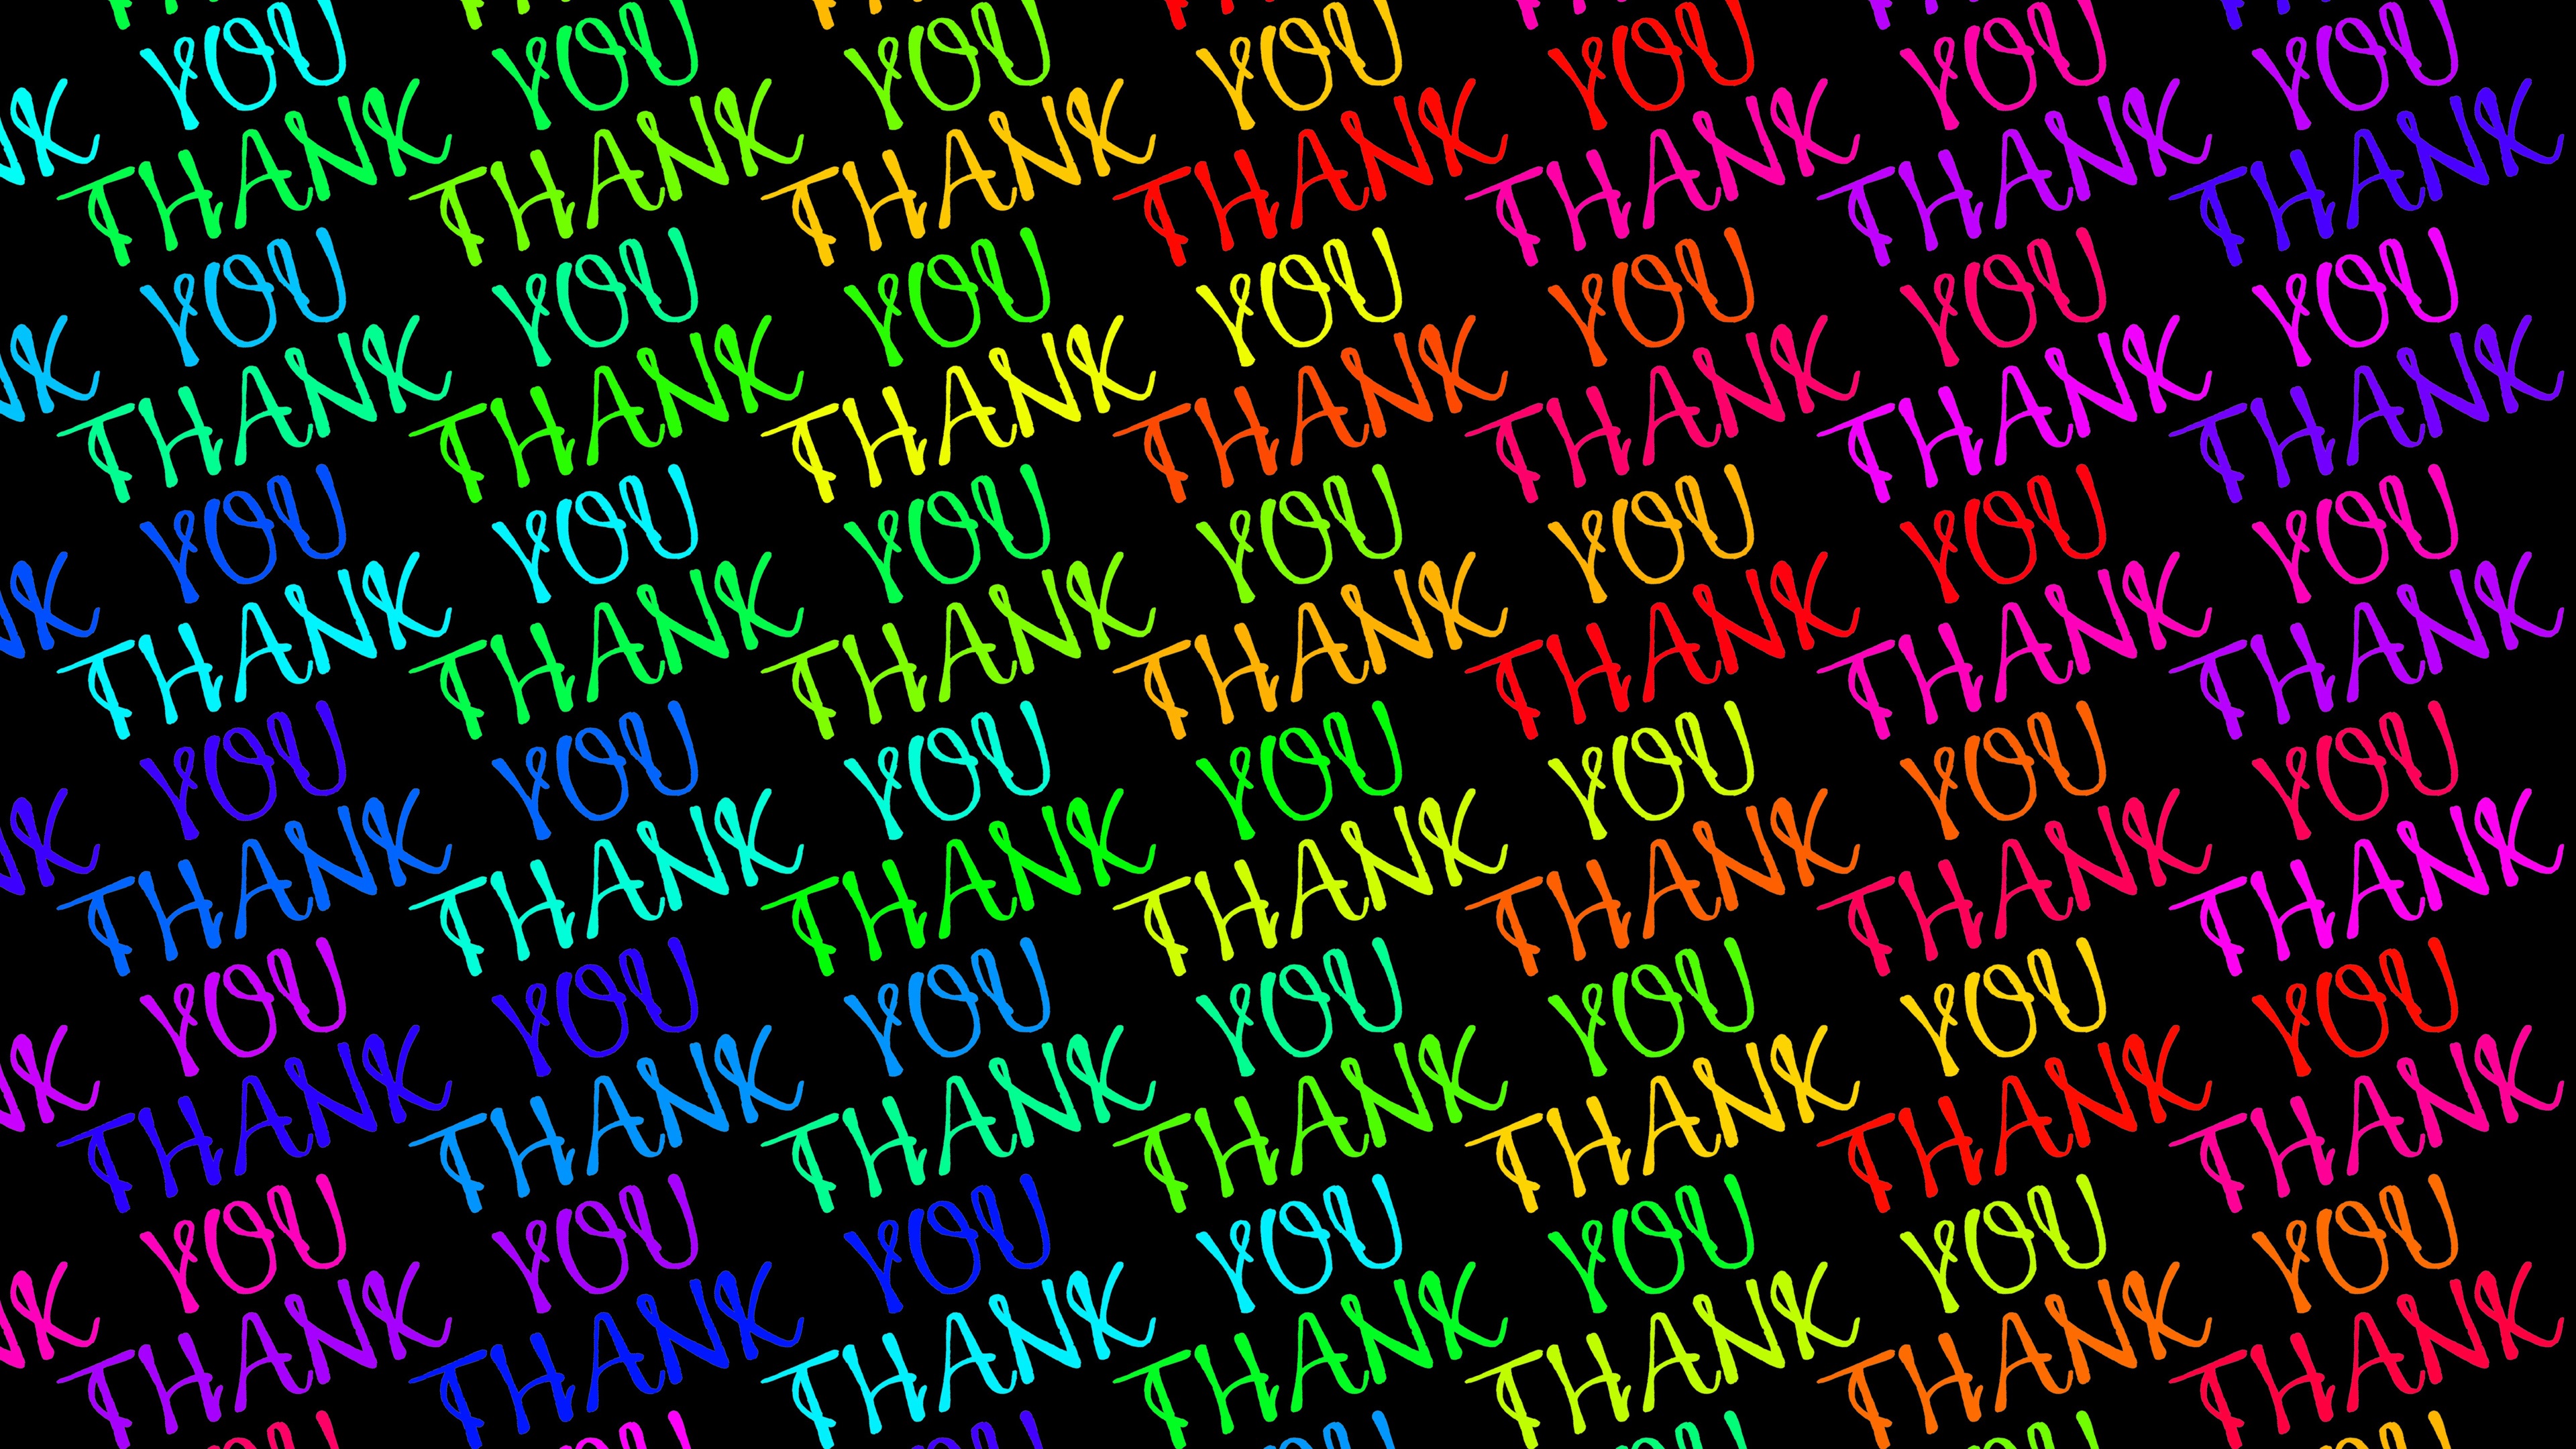 Wallpaper Colorful Thank You text 3840x2160 UHD 4K Picture